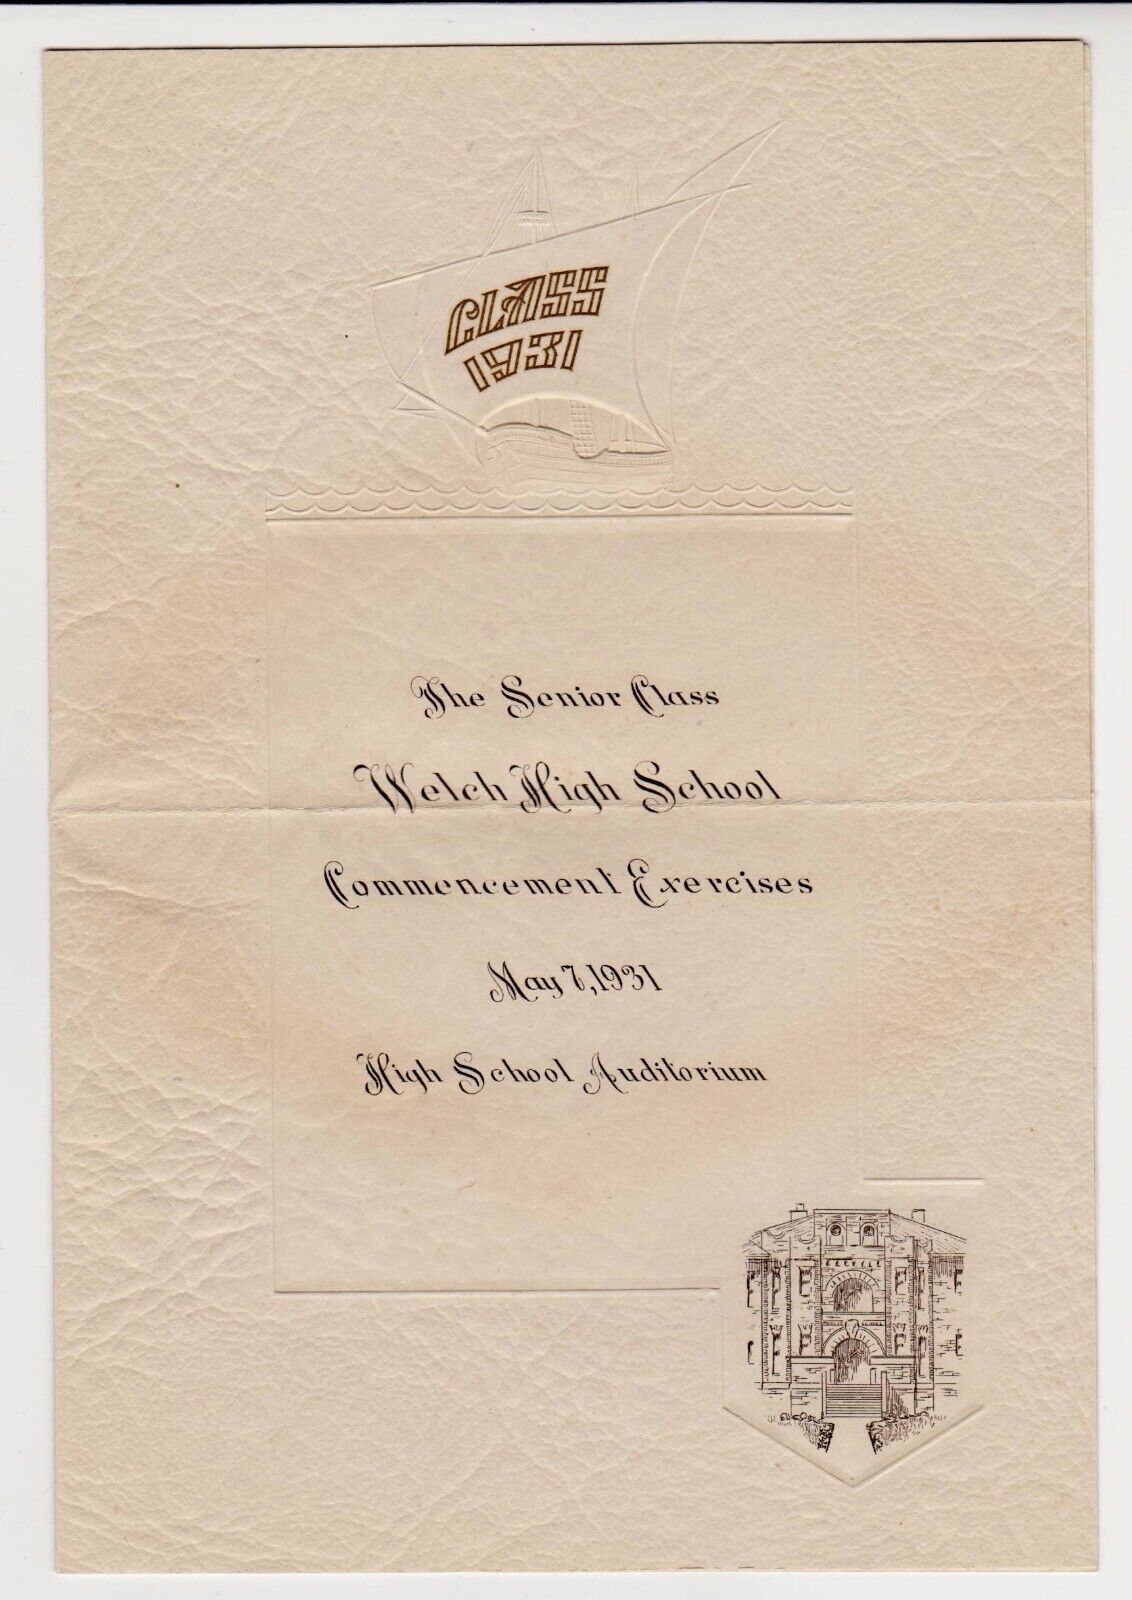 WELCH HIGH SCHOOL, WELCH, OKLAHOMA – COMMENCEMENT EXERCISES – CLASS of 1931